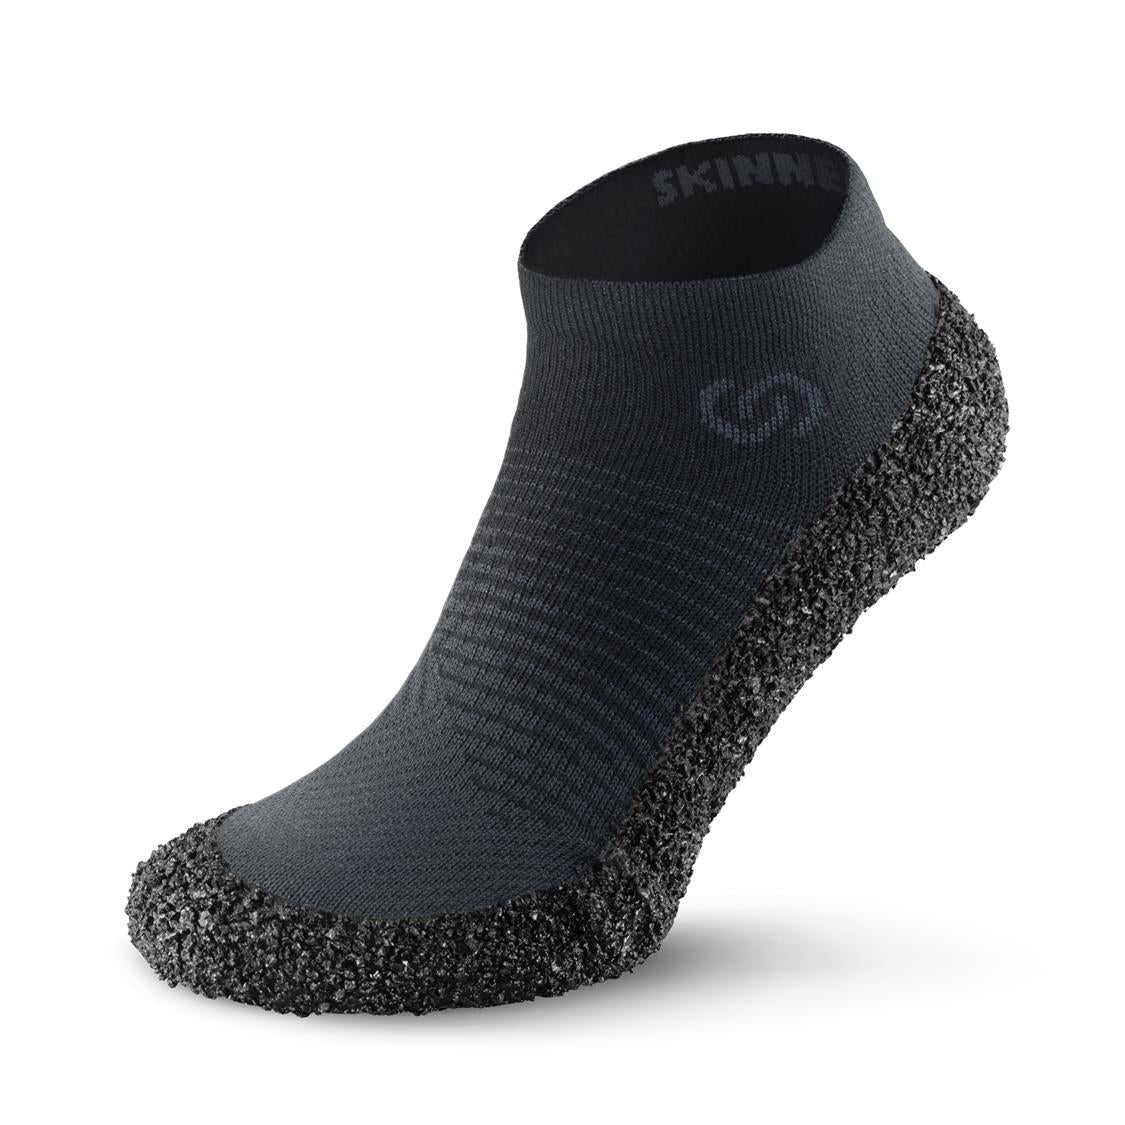 Skinners-2-COMFORT-anthracite_side